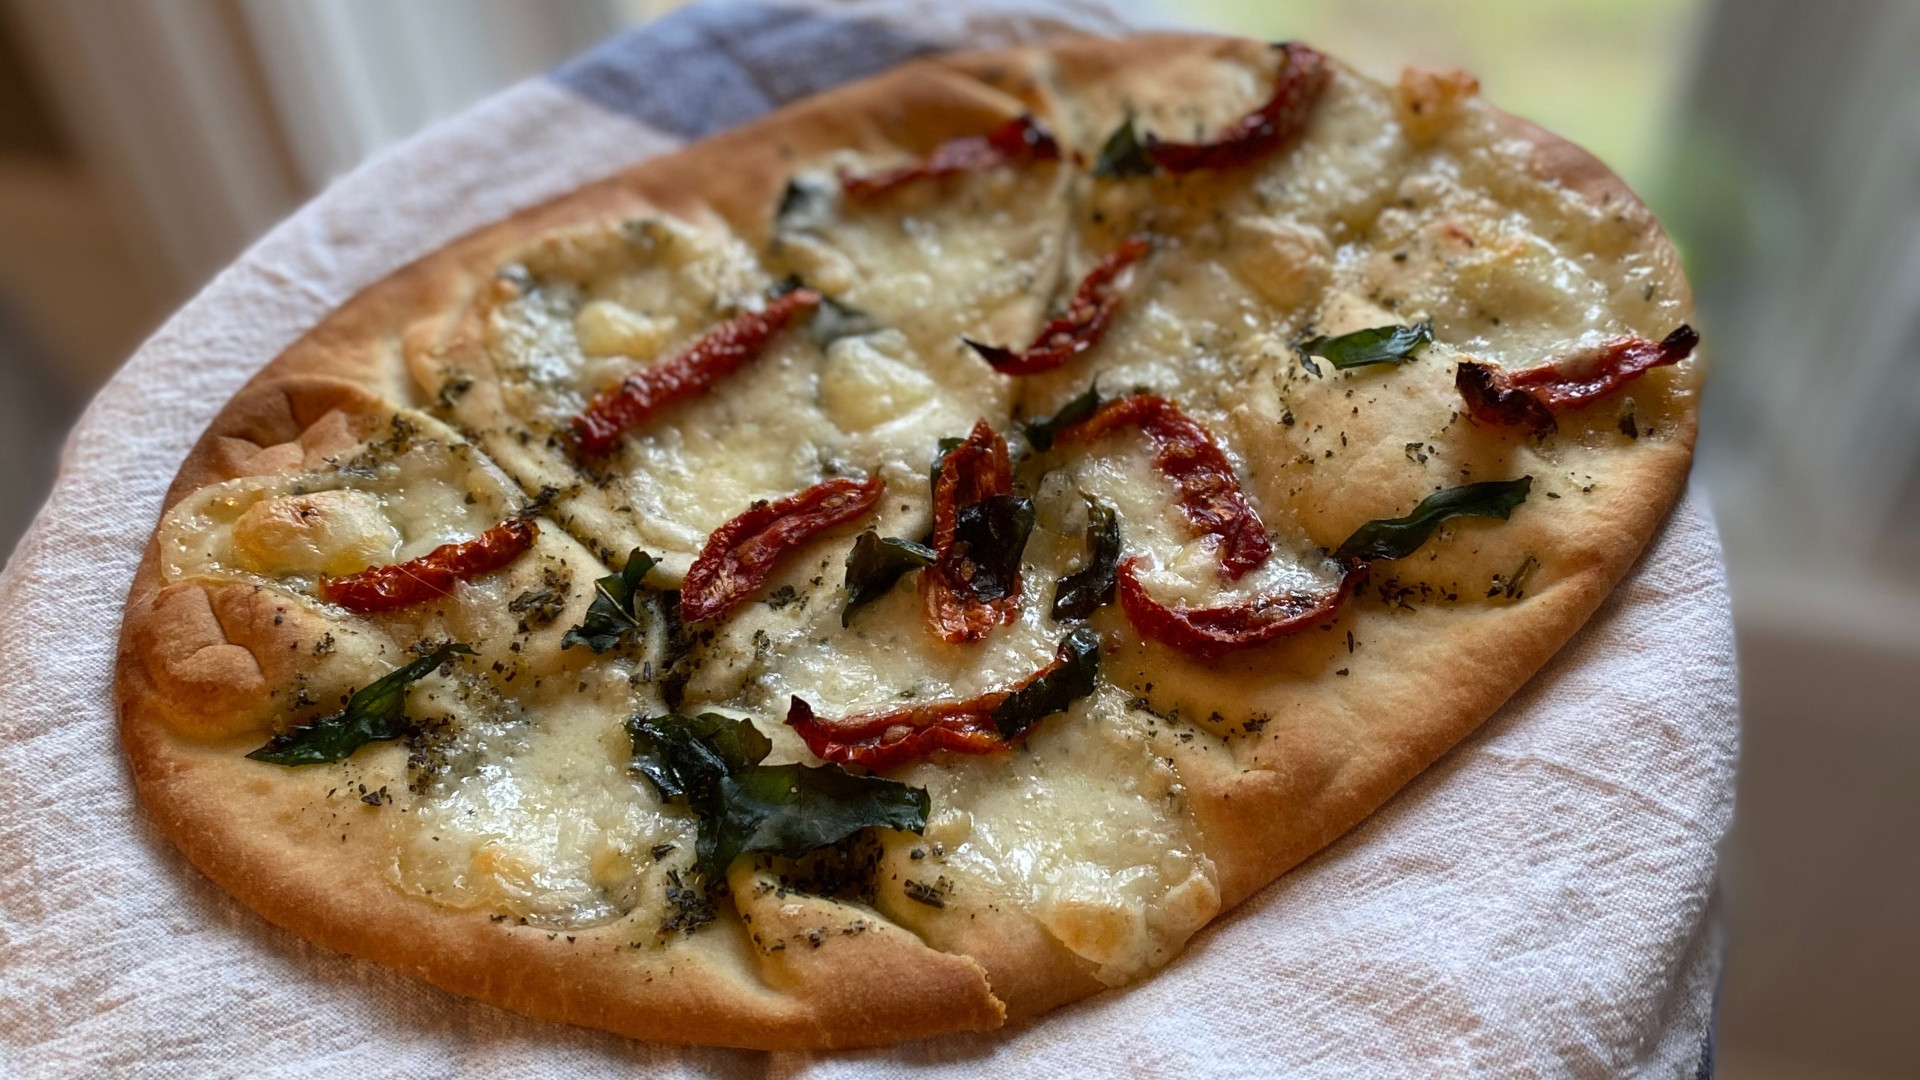 Pizza Dough with Self Rising Flour Best Of 5 Inre Nt Recipes with Self Rising Flour the Dough for